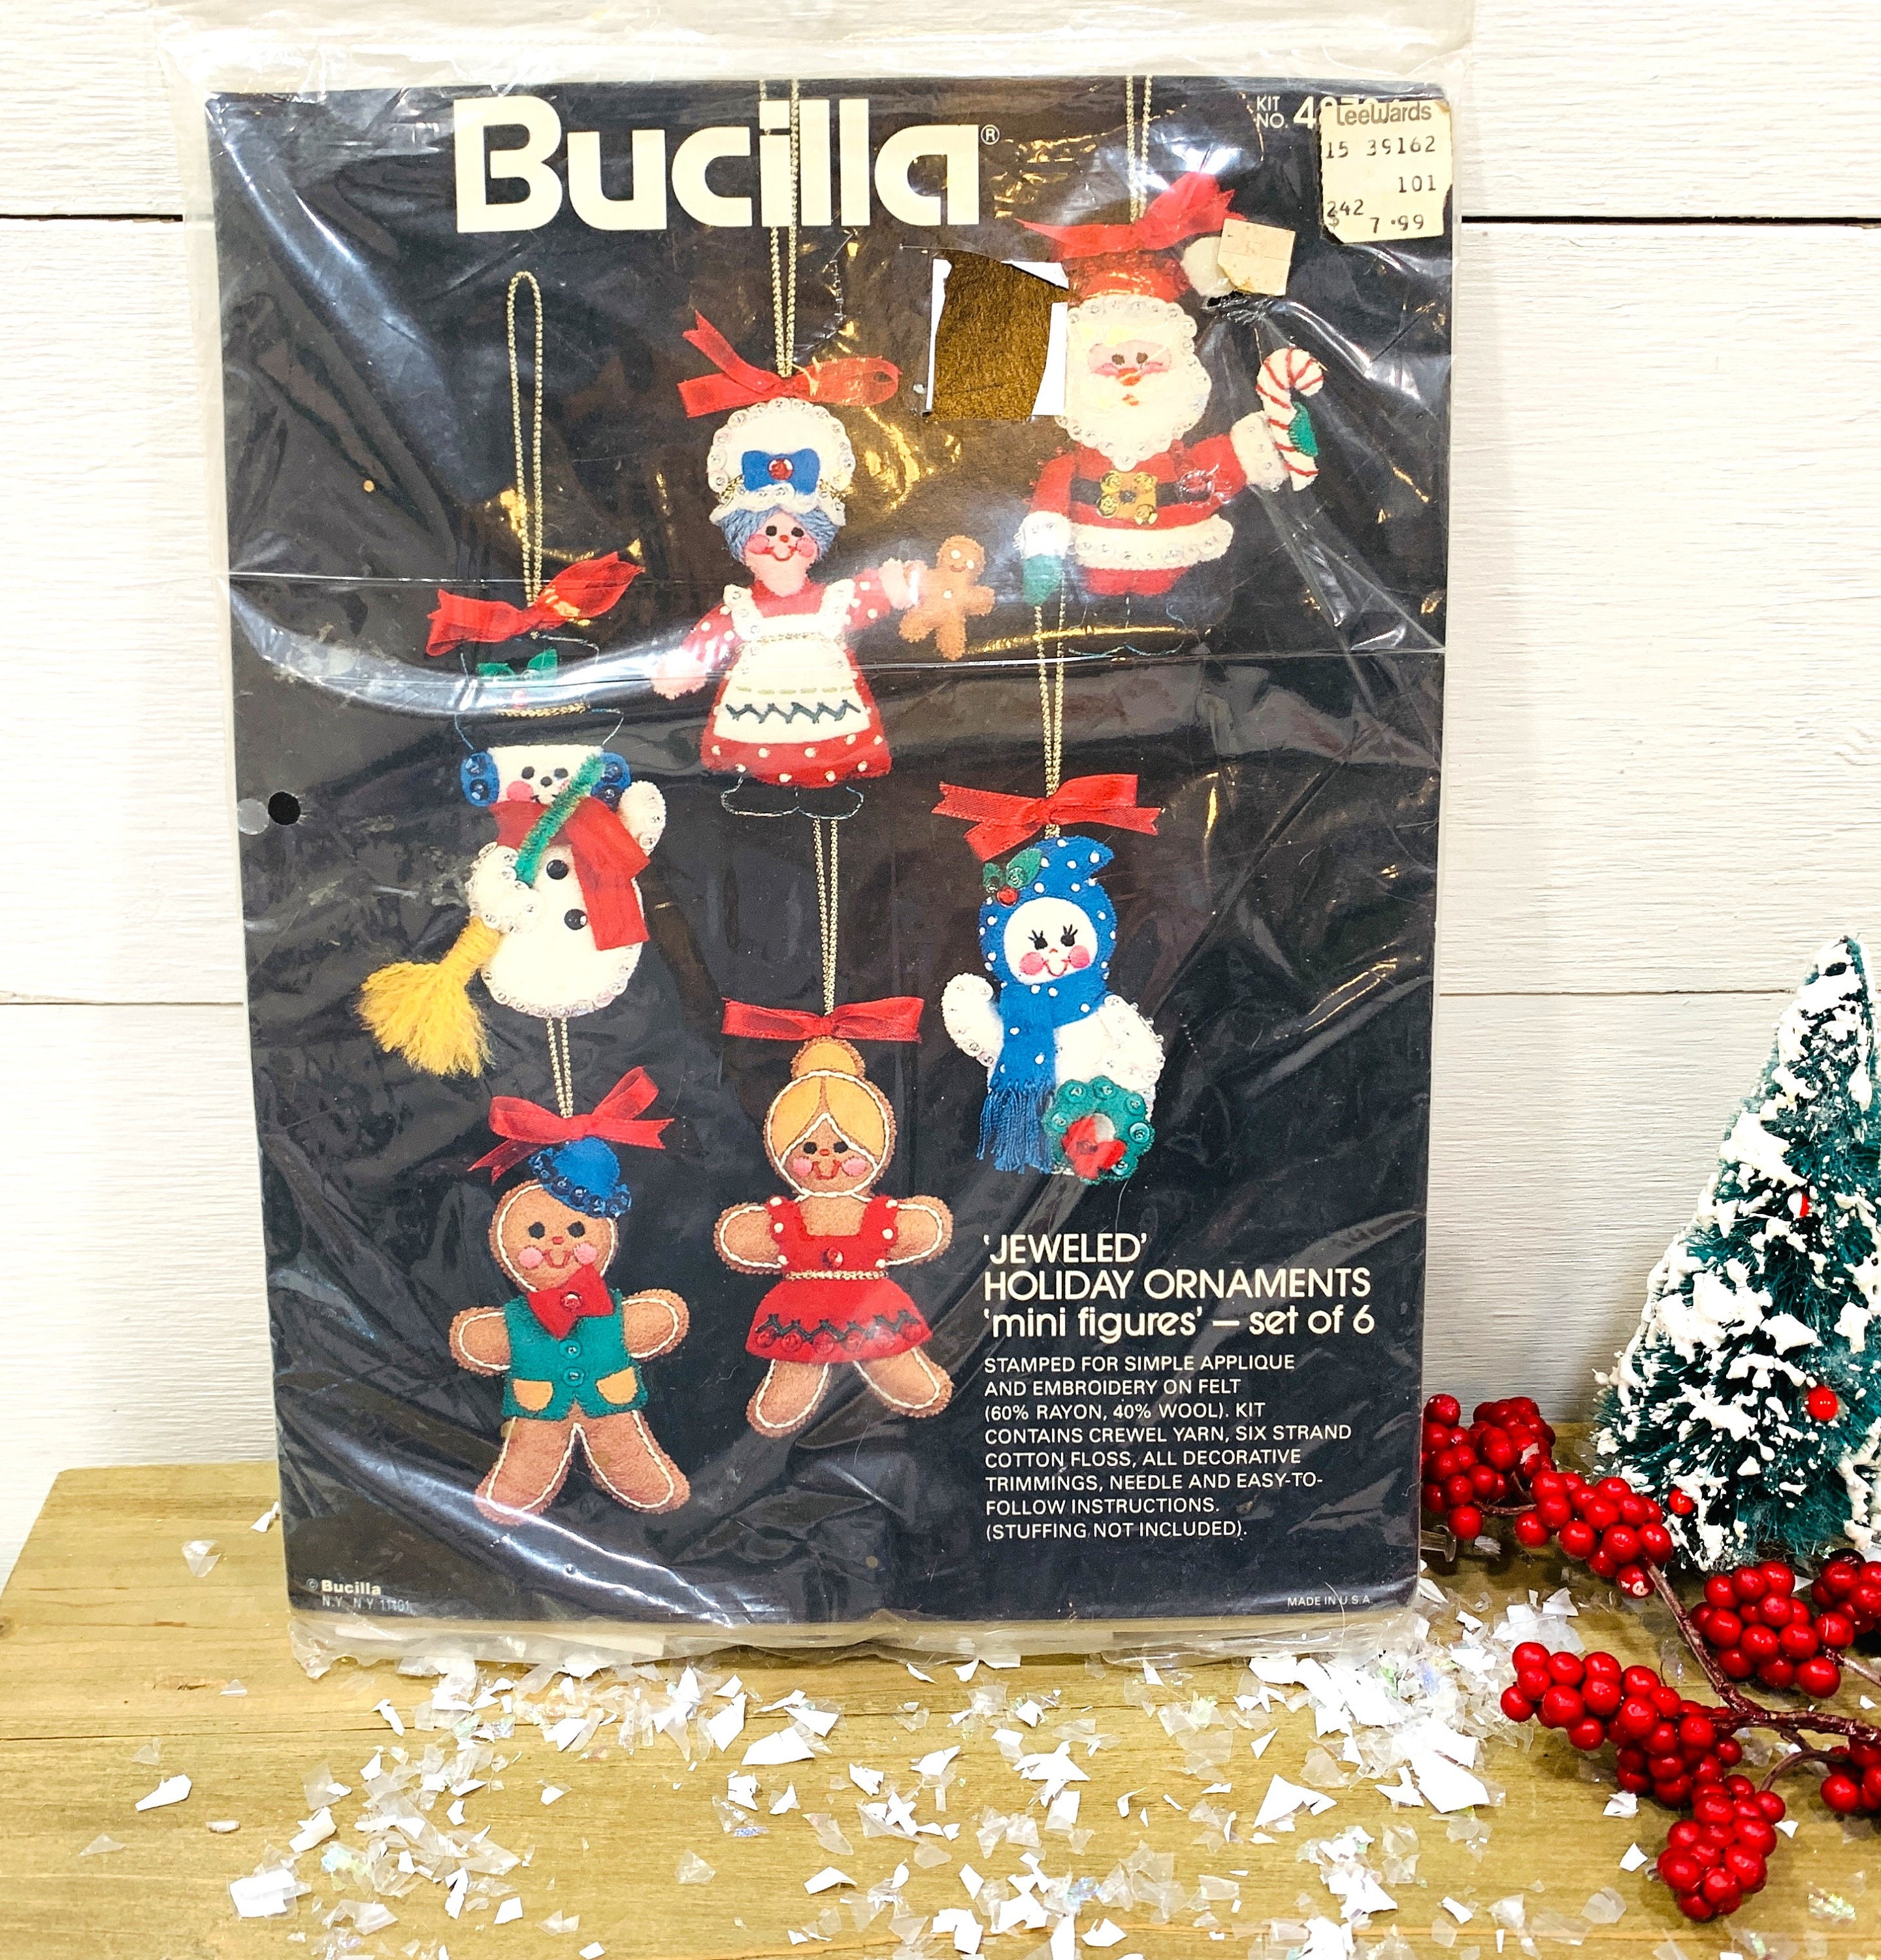 Vintage Bucilla Crafts Jeweled Holiday Ornaments Mini Figures Set of 6  Unopened Package-kit No. 48786 Gingerbread, Snowmen, Mr. Mrs. Claus 